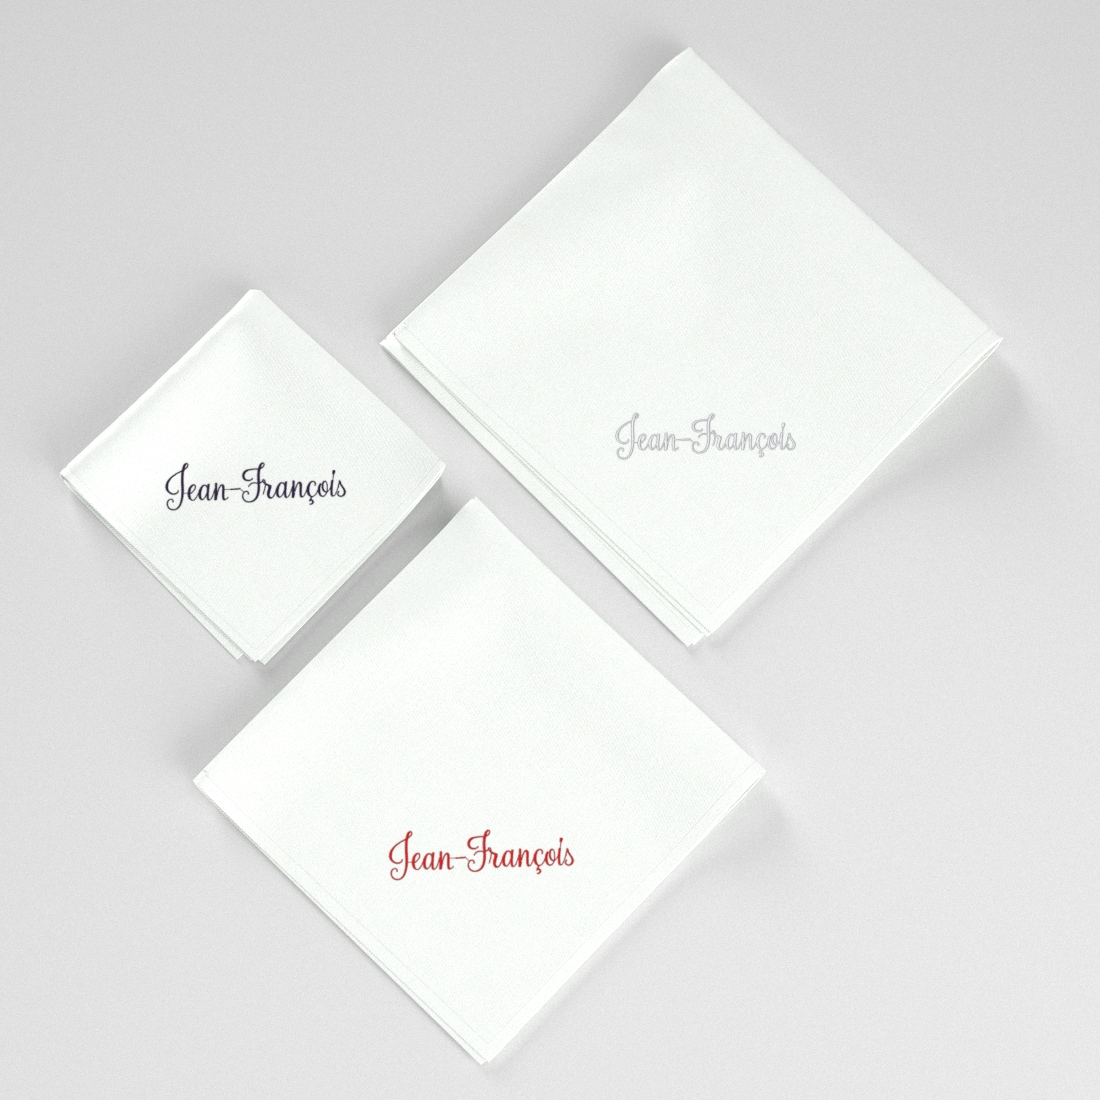 Personalized organic handkerchiefs with your initials are Embroidered & made in Paris by Philipp Gaber since 2009​